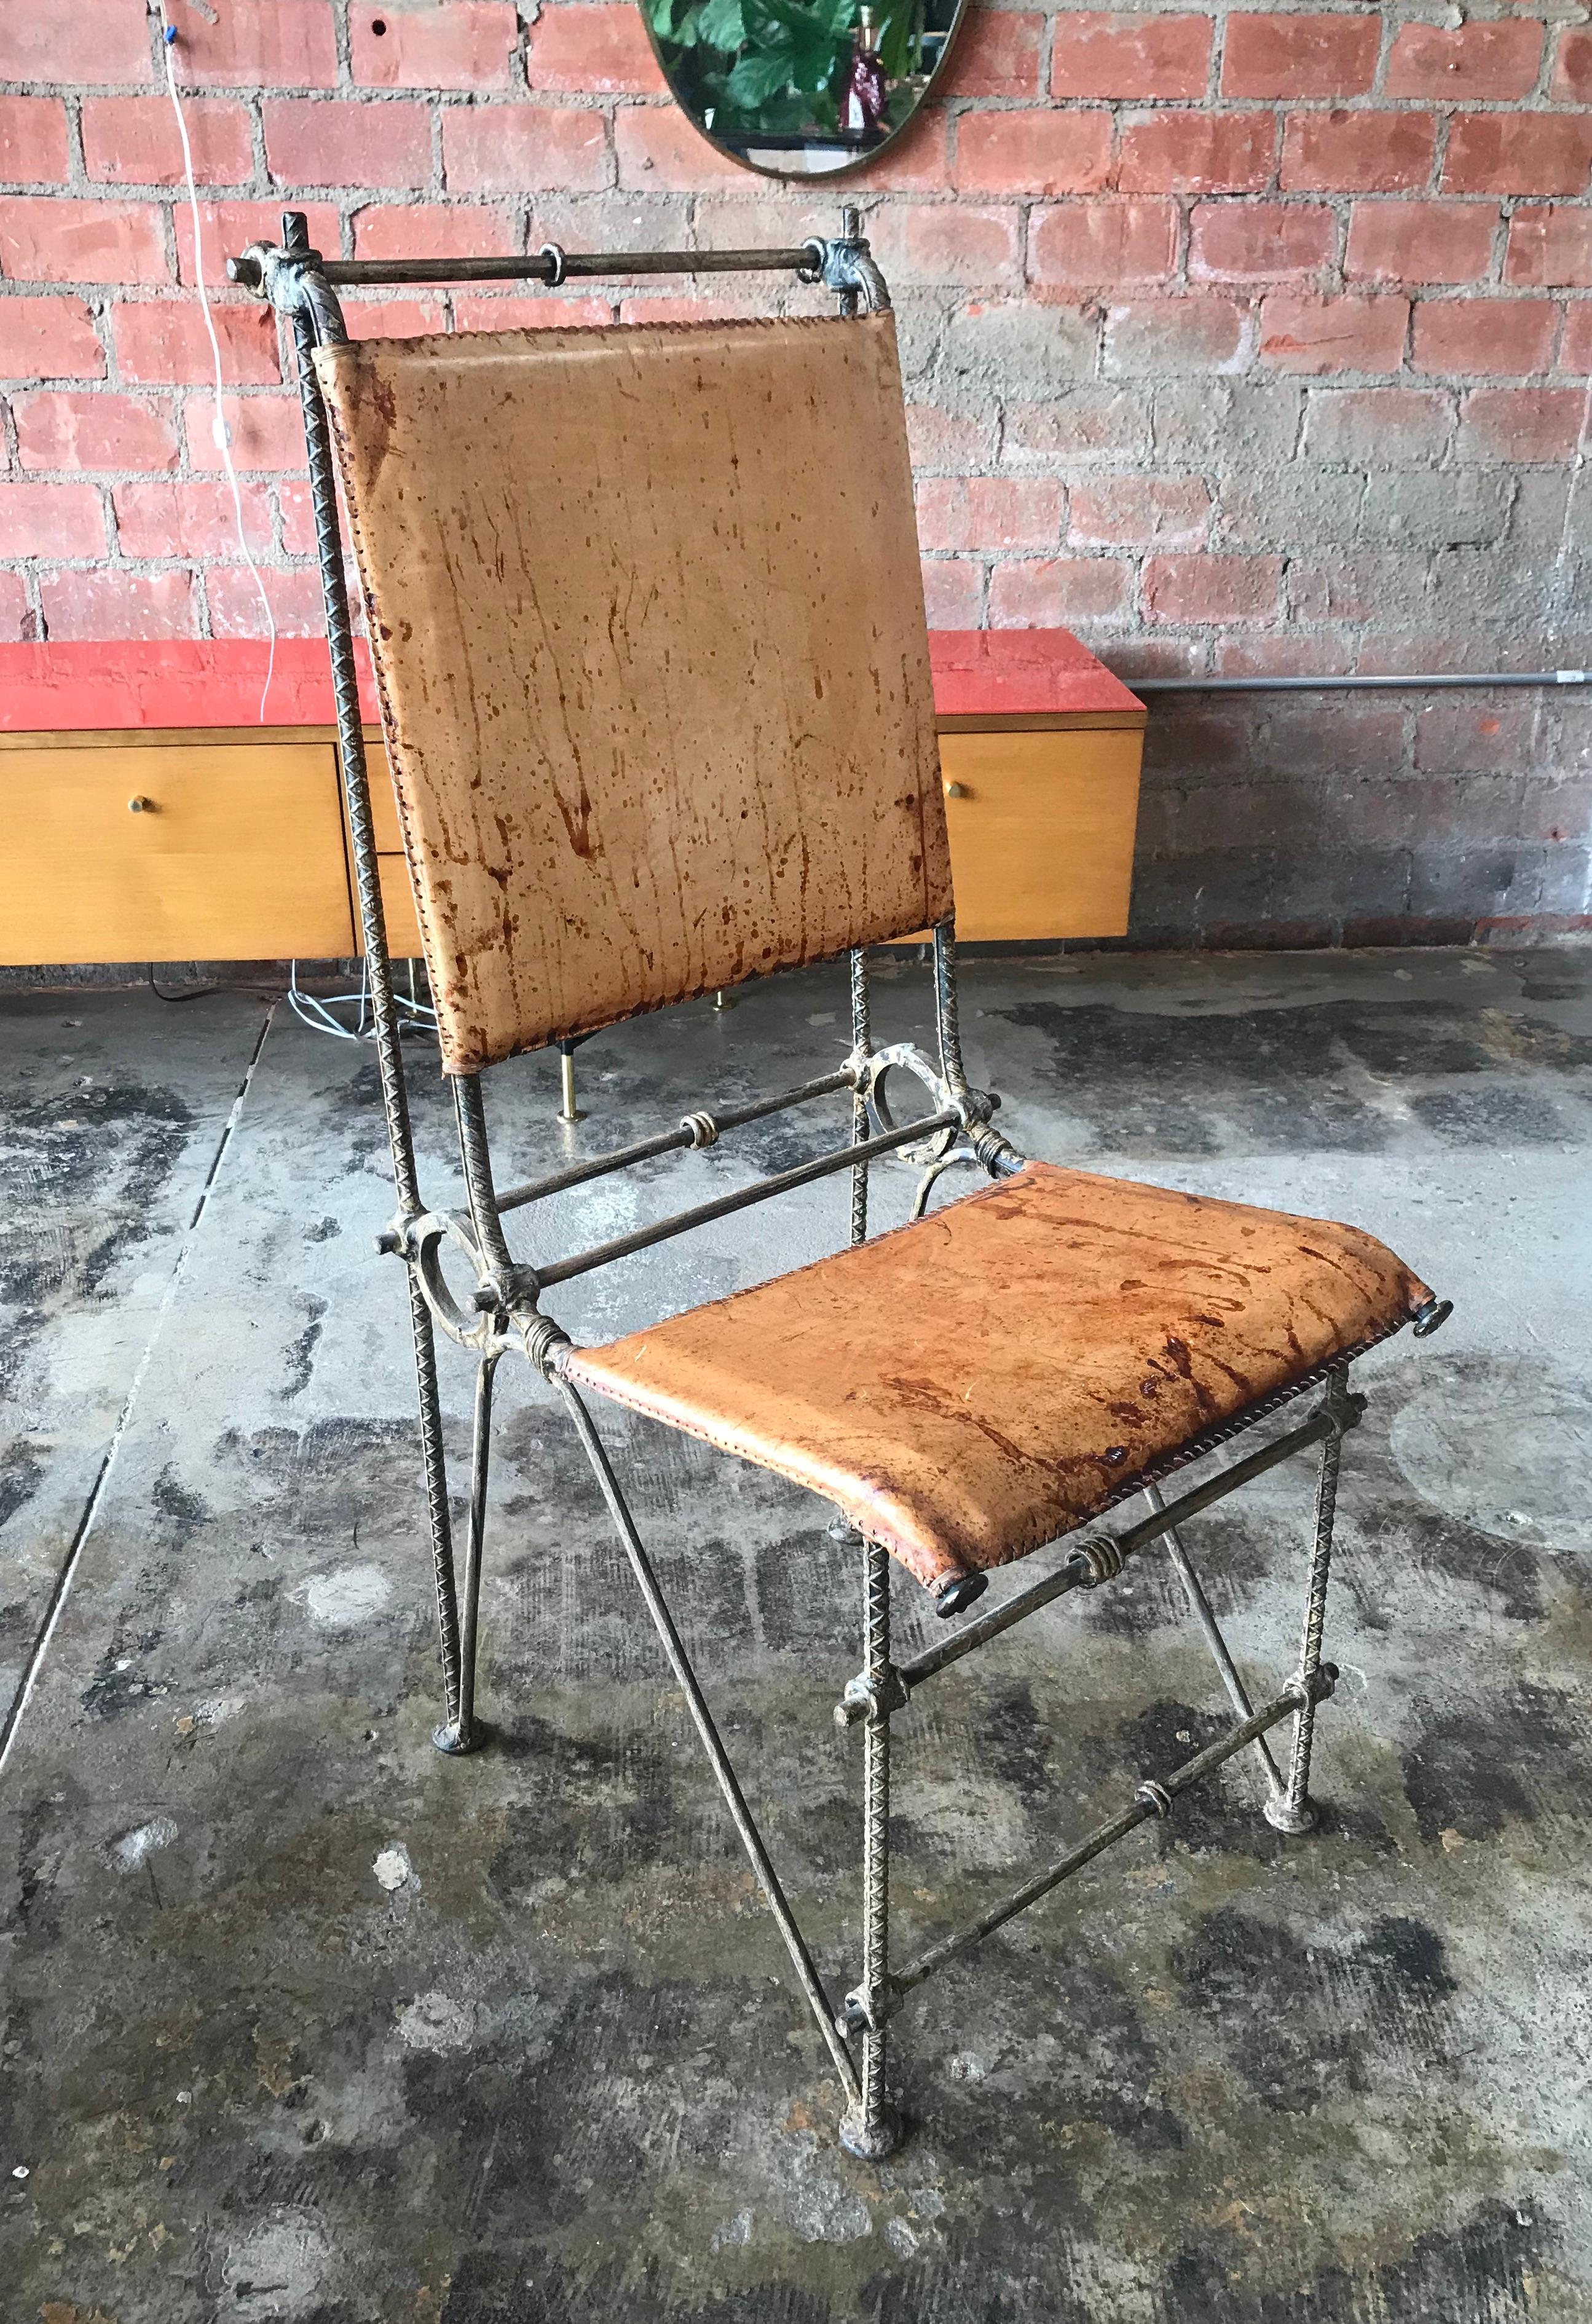 Very reminiscent of Brutalist designed furniture expression.
High quality Mid 20th century iron dining chair with distressed leather seats and backs attributed to Ilana Goor.
The chairs have a great old world / mid century modern design with